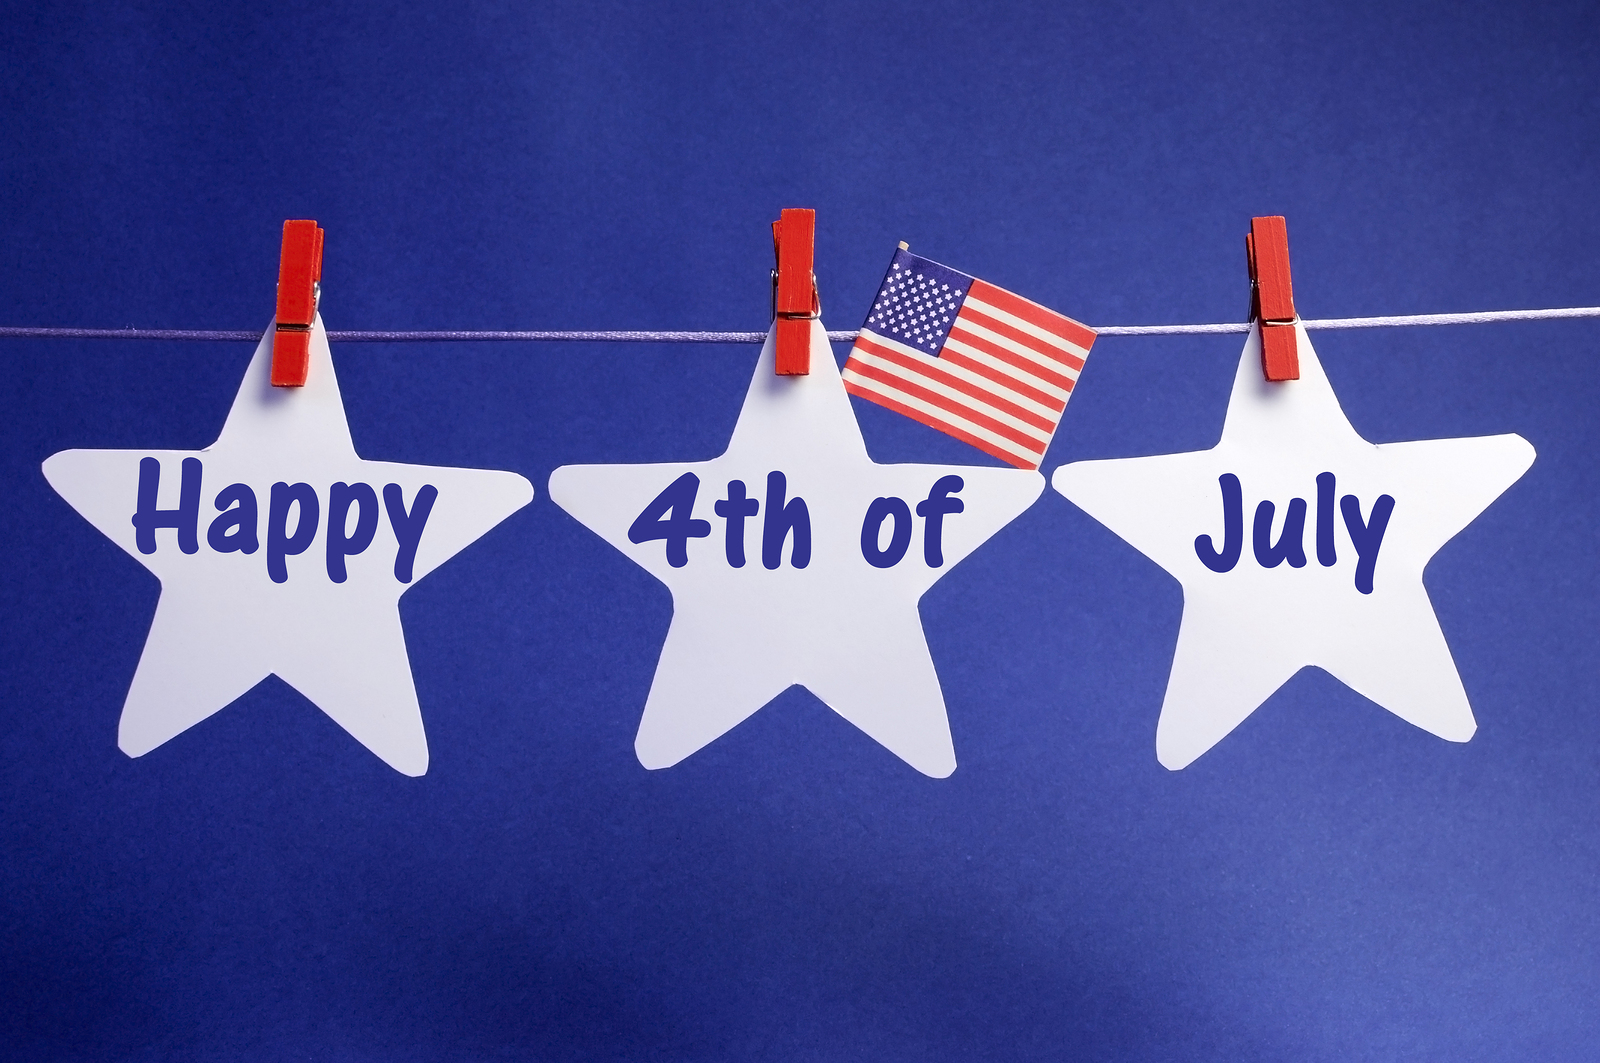 Happy 4th of July Pictures 2020 - 4th of July Pictures, Wallpapers, Photos, HD Pics For Whatsapp Status DP